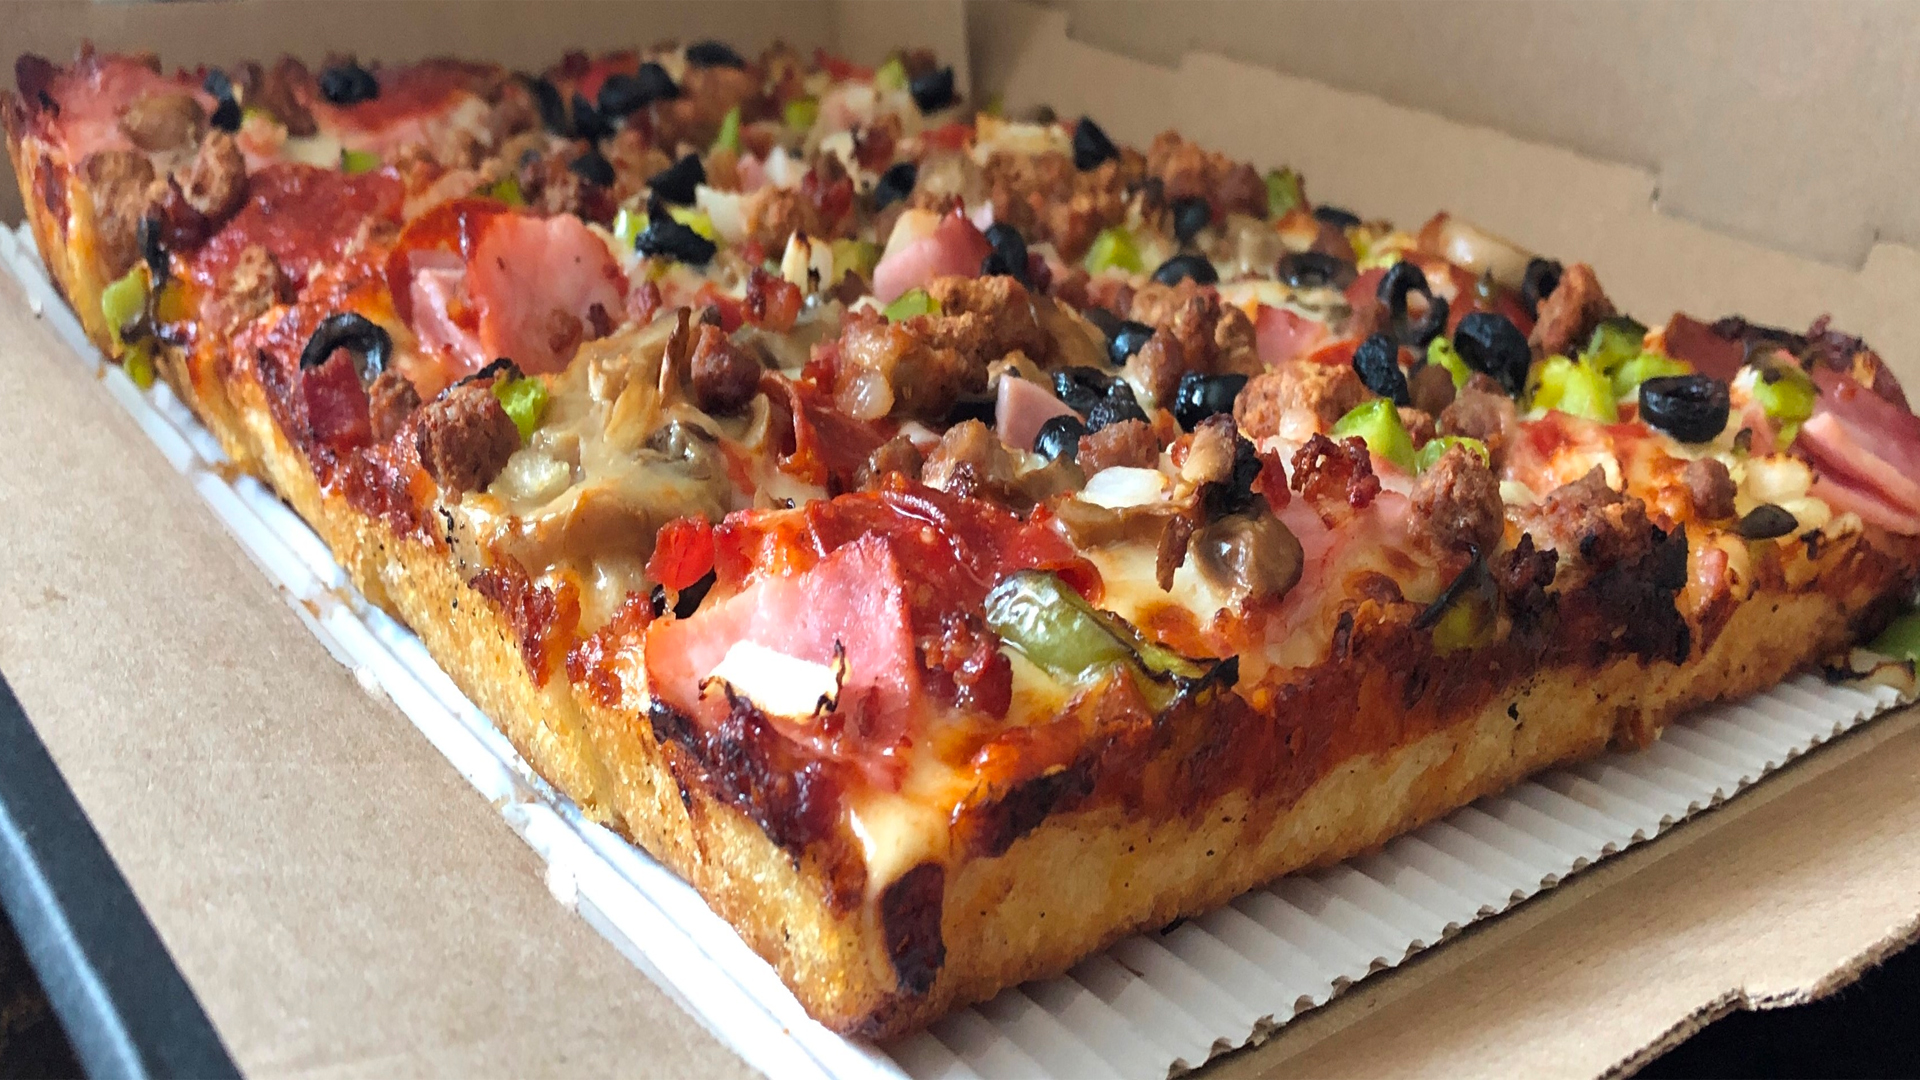 Detroit Style Pan Pizza - Menu - Master Pizza - Taste Above All since 1955  in Ohio serving Pizza + More